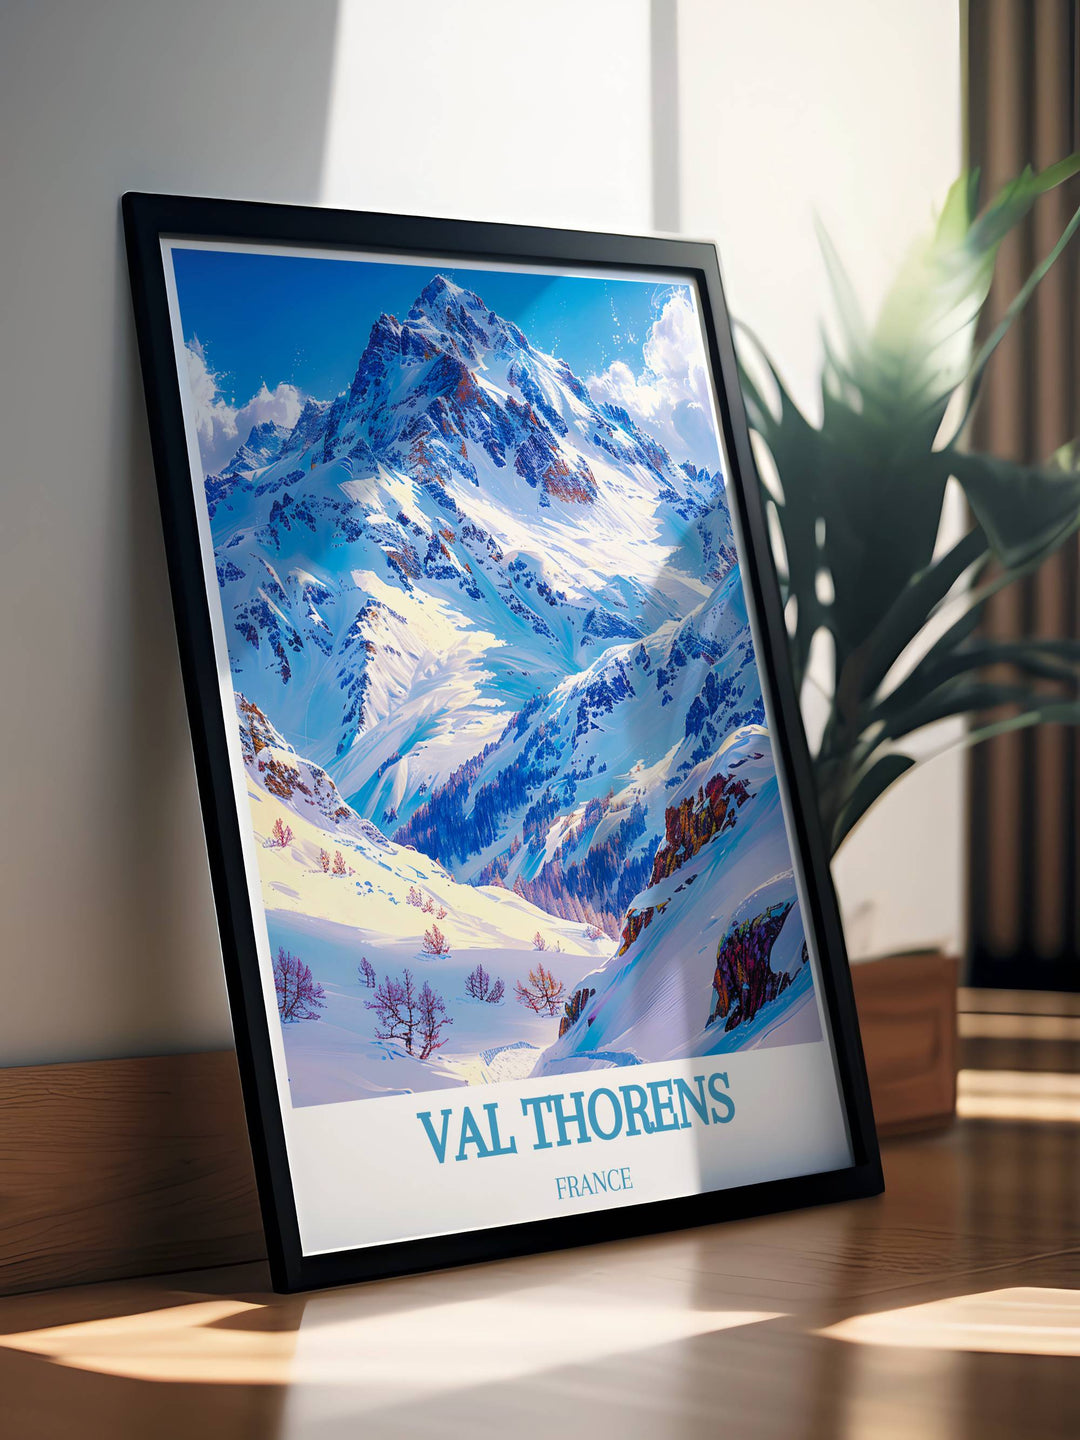 Canvas art of Val Thorens showcasing the stunning peak of Cime Caron, ideal for adding a touch of alpine grandeur to any room. Perfect for lovers of mountain scenery.